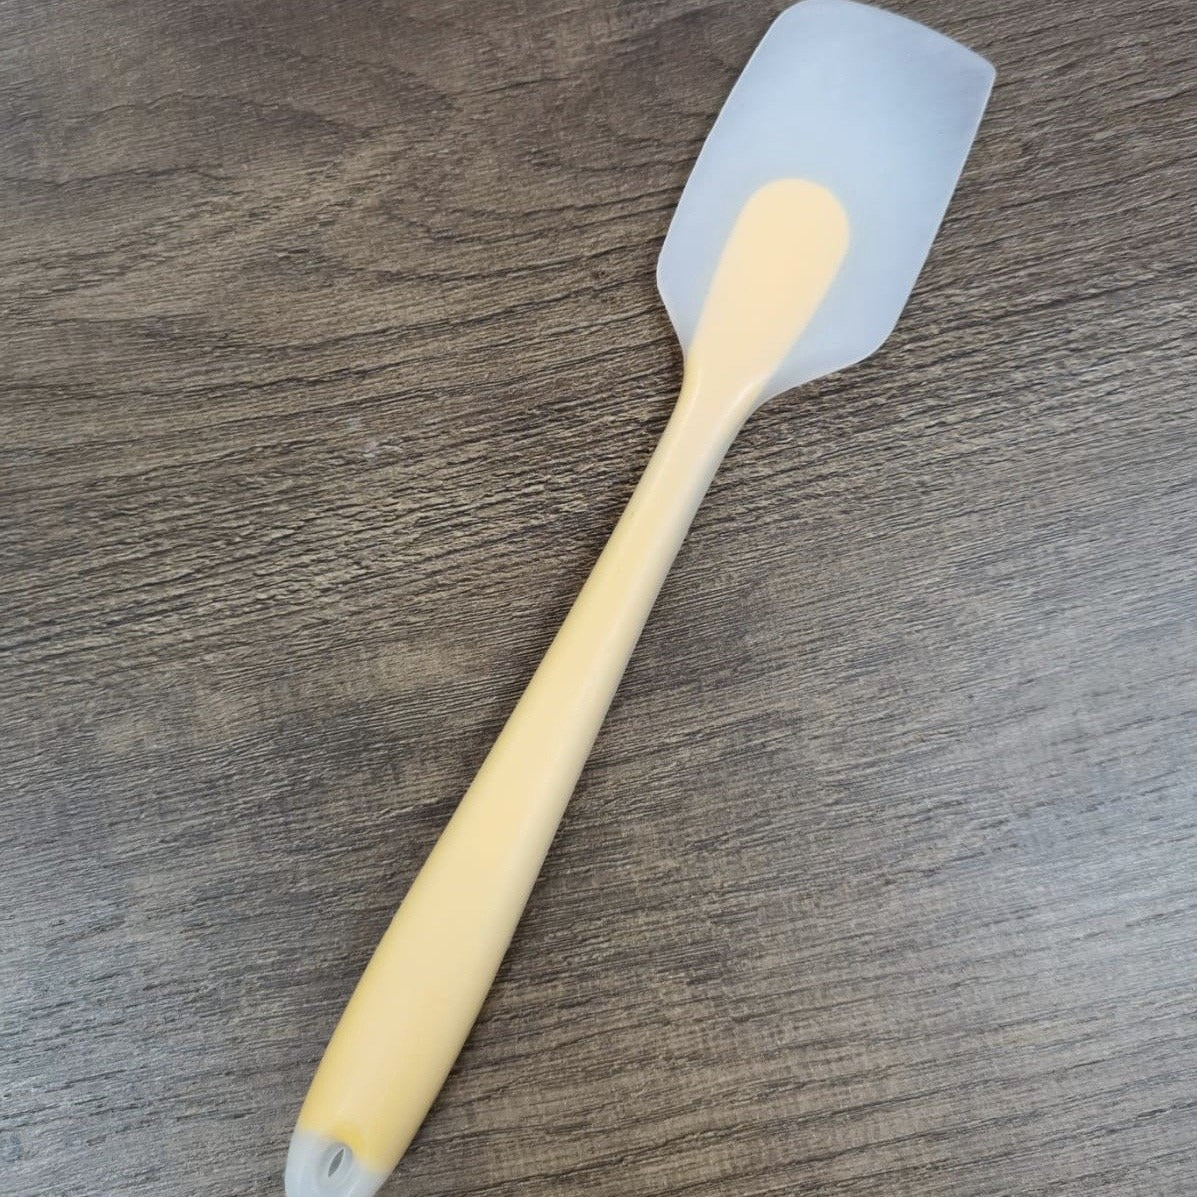 Spatula（Small Size) 刮刀（小號） - Life Science Publishing & Products Hong Kong and Asia